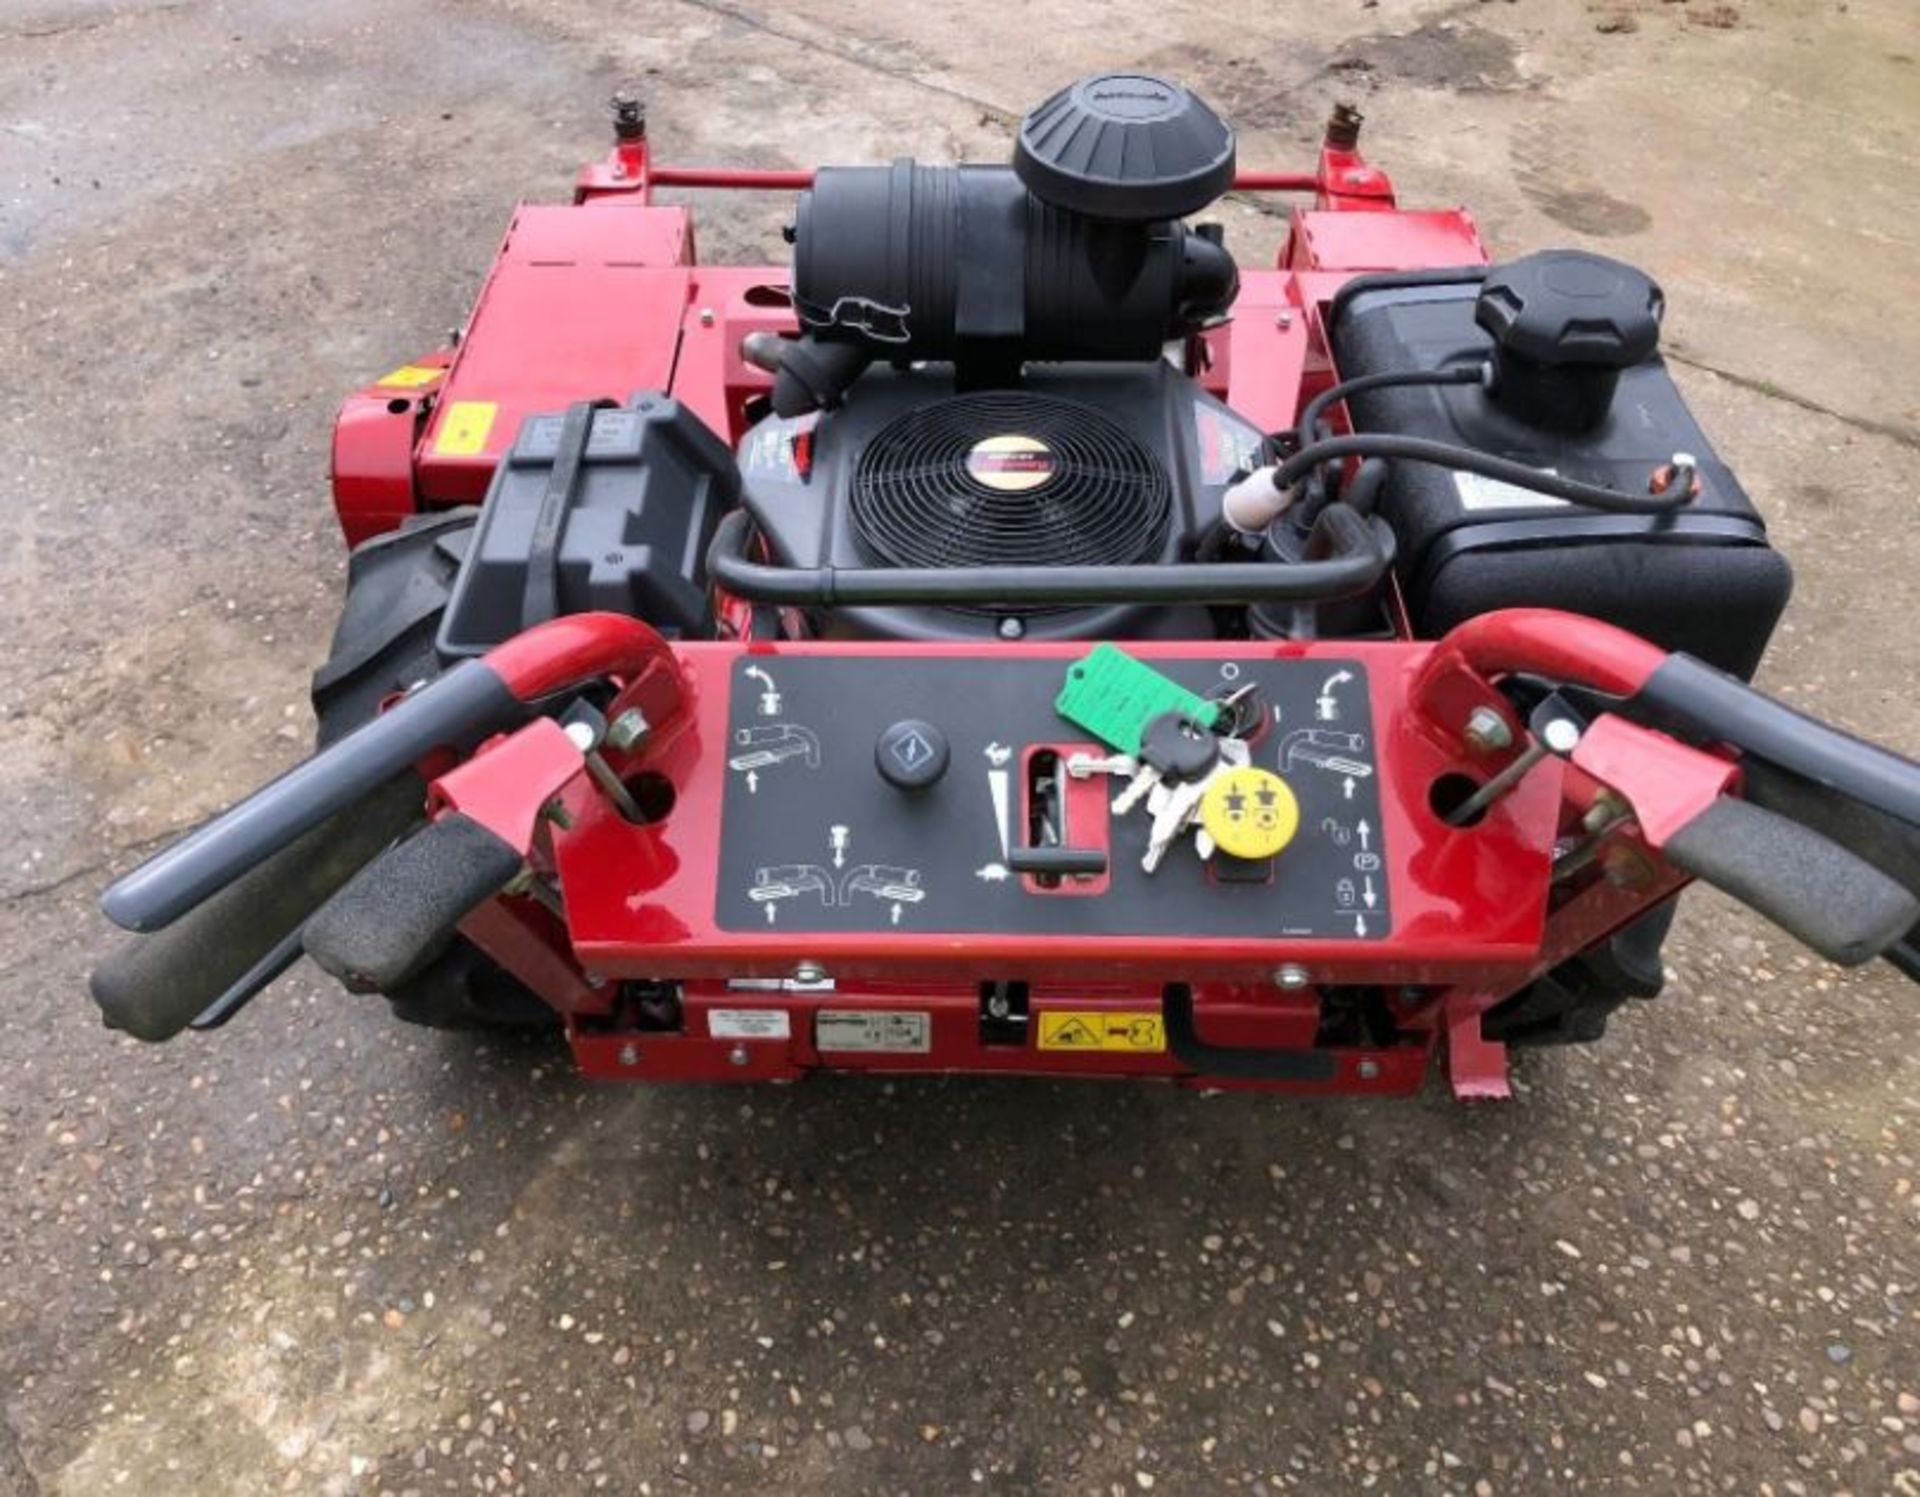 FERRIS FLAIL BANK MOWER, 48" CUT, YEAR 2014, IMMACULATE CONDITION, ZERO TURN *PLUS VAT* - Image 5 of 6